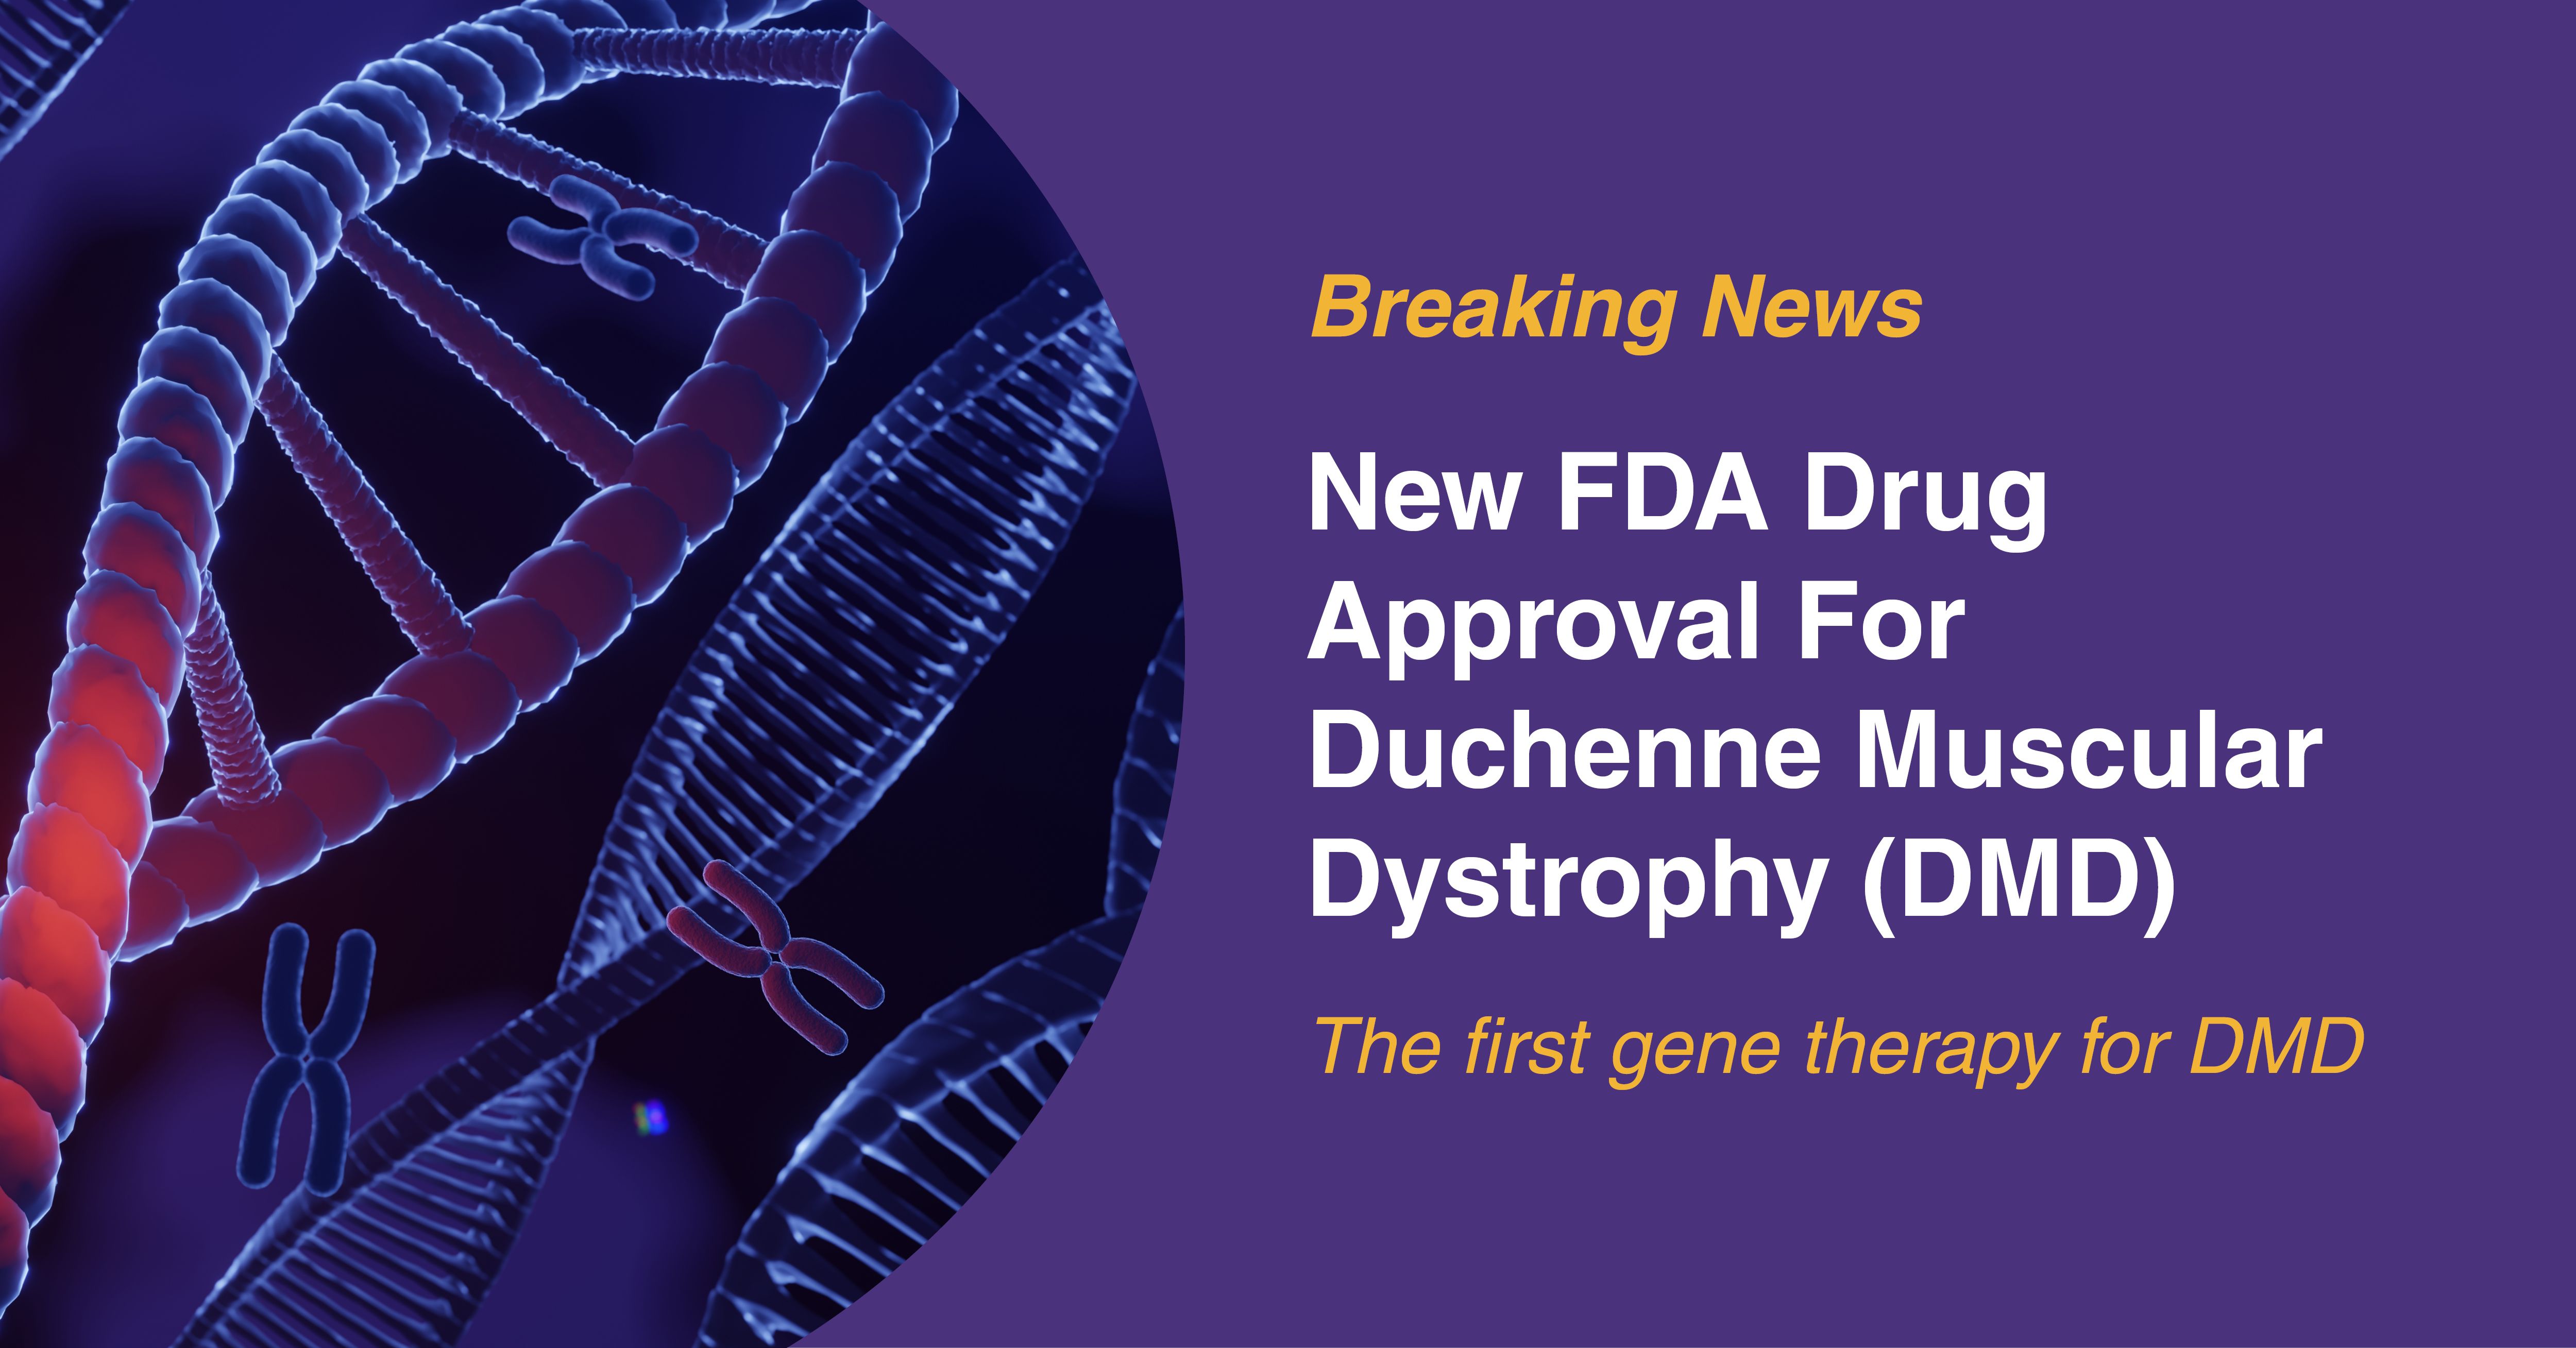 Muscular Dystrophy Association Celebrates FDA Approval of Sarepta Therapeutics’ ELEVIDYS  for Treatment of Duchenne Muscular Dystrophy